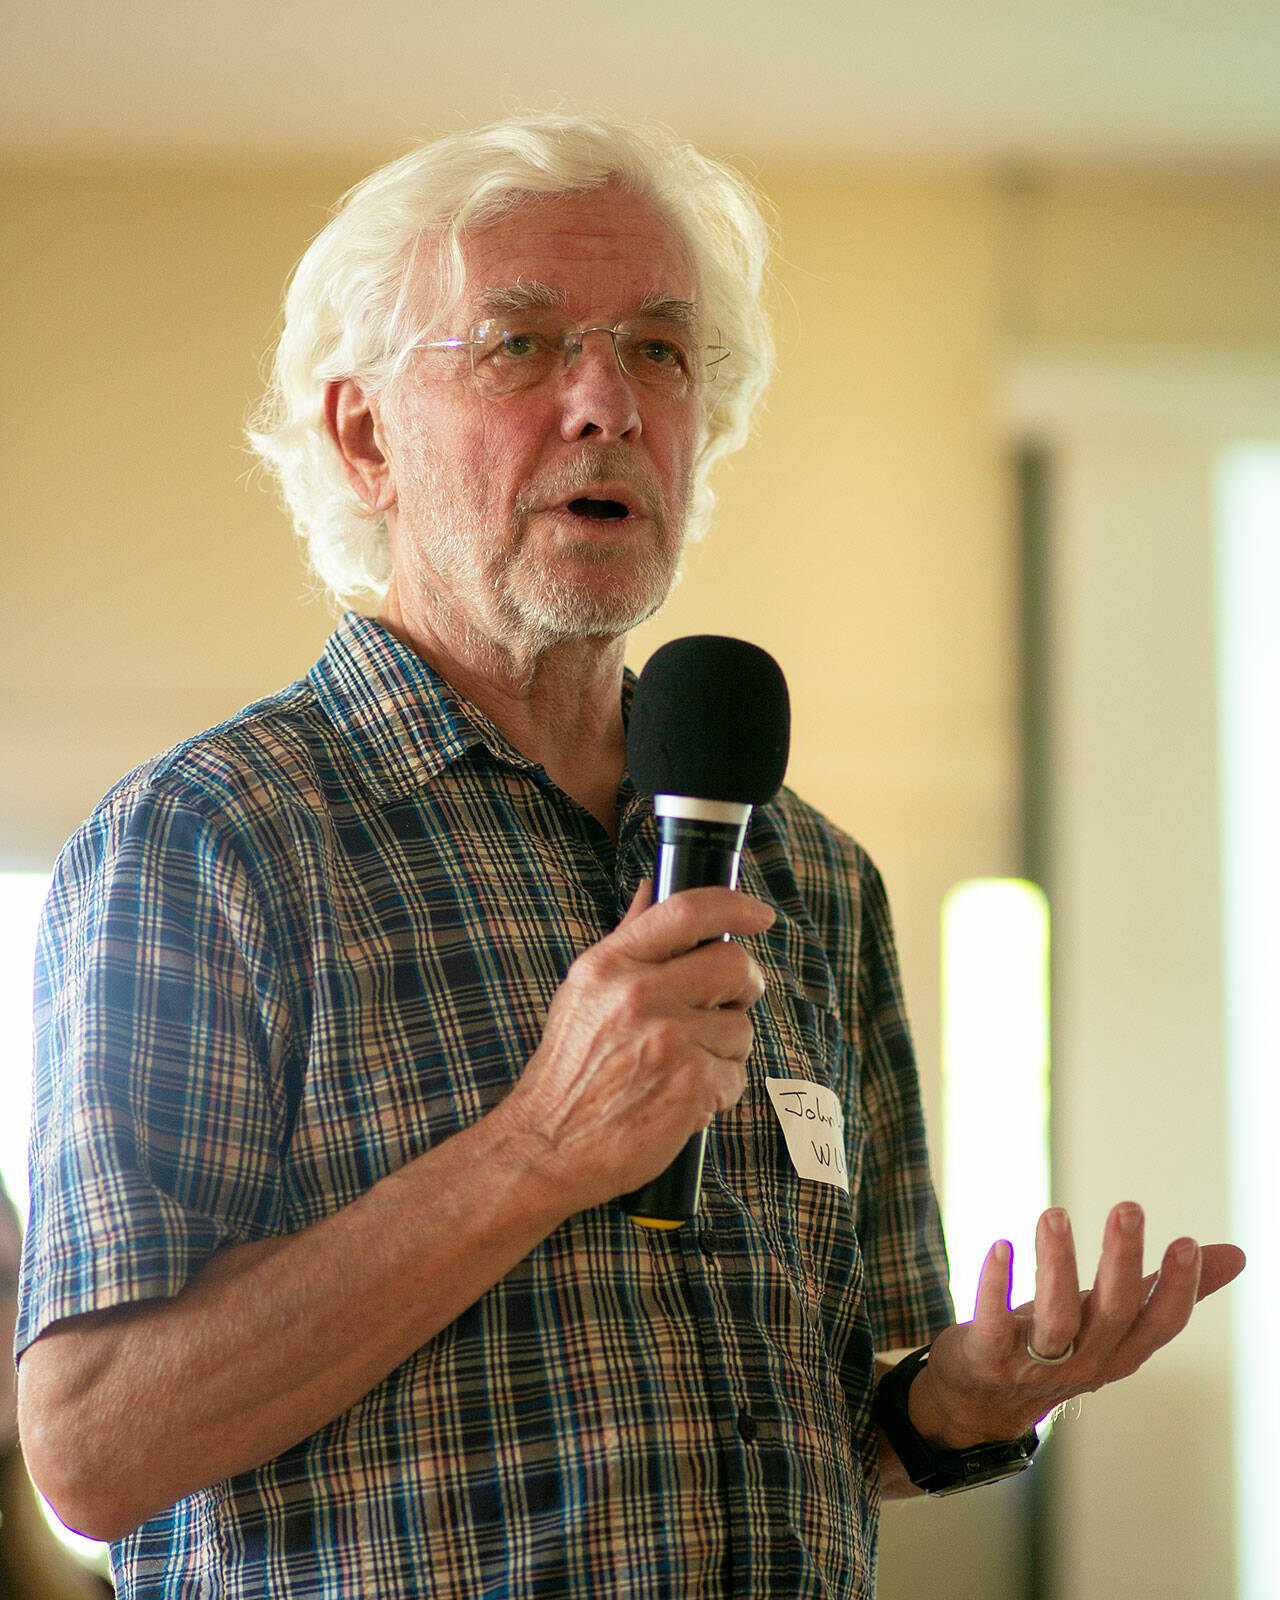 John Lovie, director of the Whidbey Island Water Systems Association, helps answer questions regarding PFAS found at sites on Whidbey Island during a public meeting on June 22, 2023, at the Coupeville Recreation Hall in Coupeville, Washington. (Ryan Berry / The Herald)